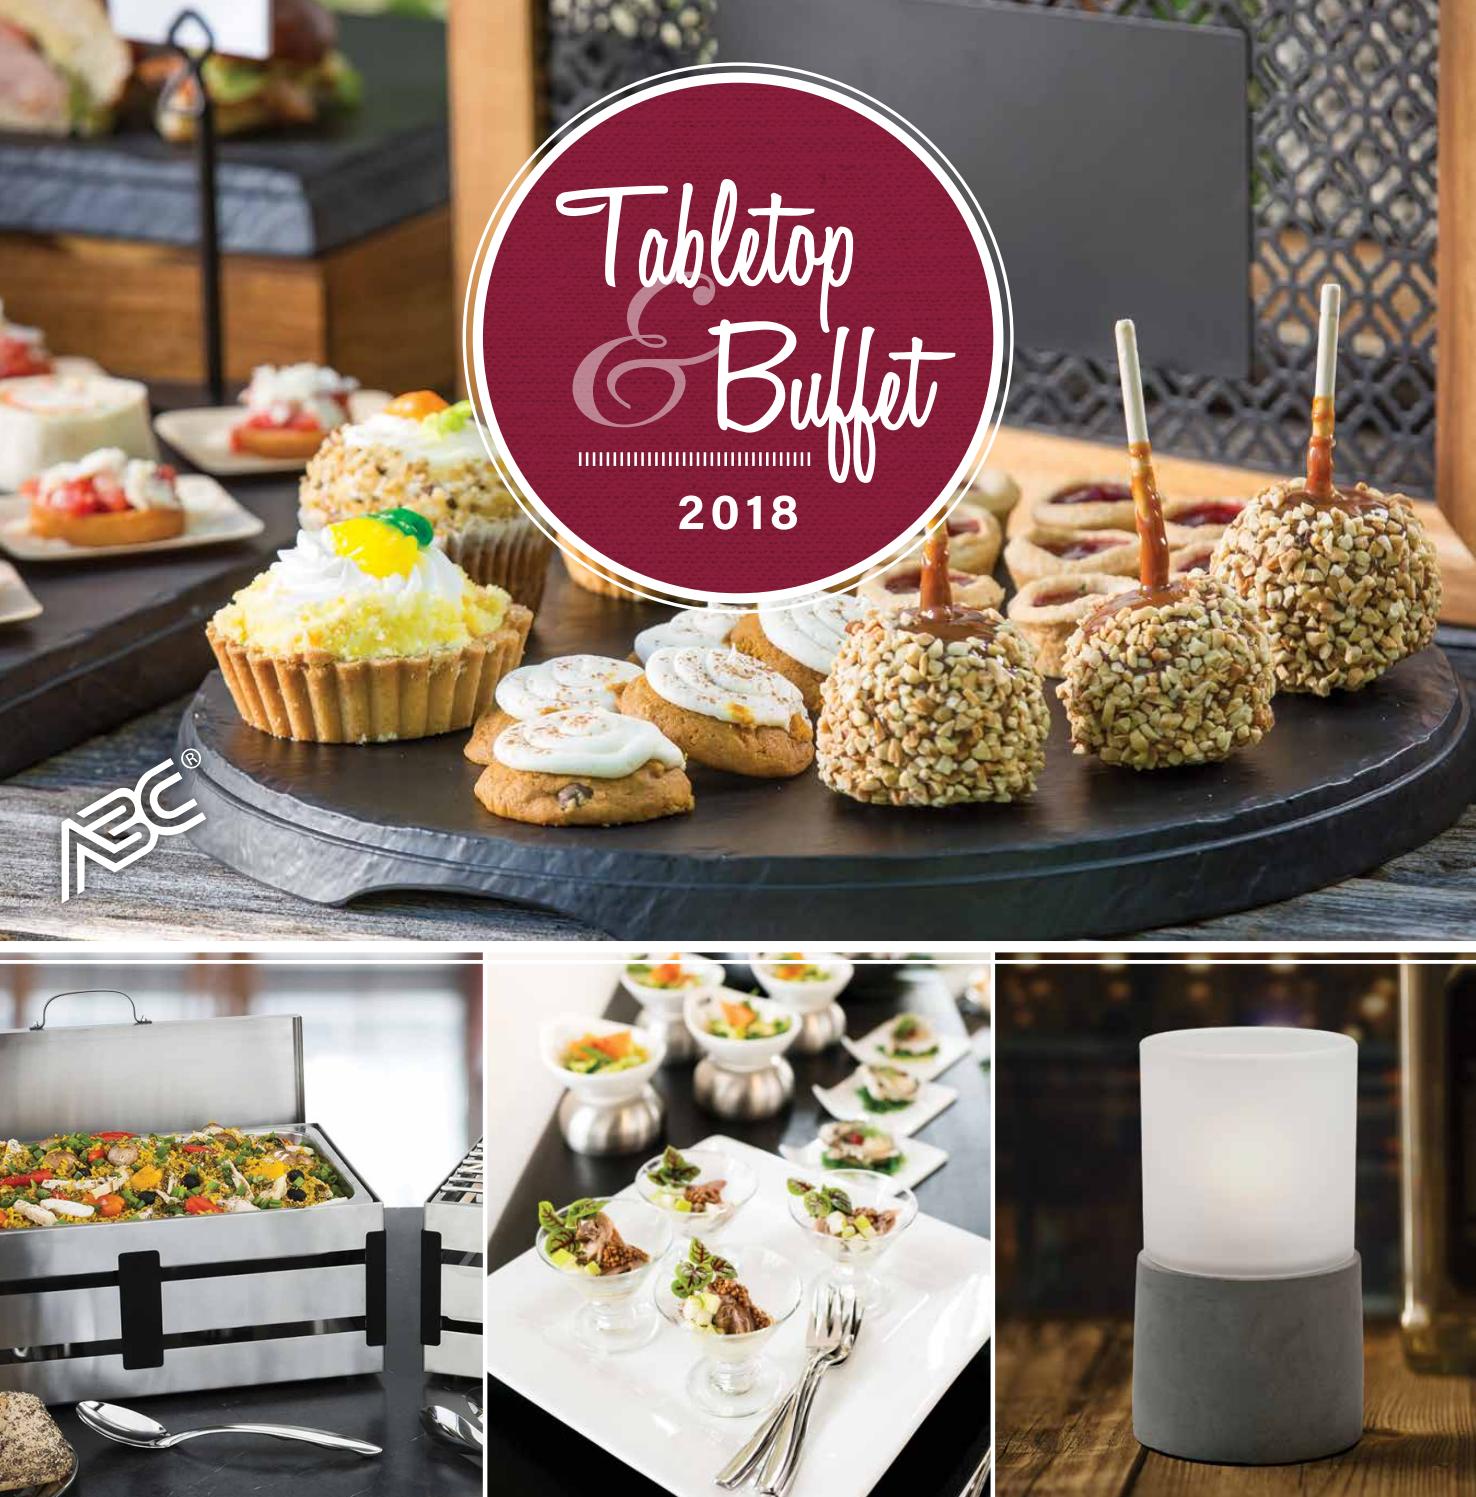 Abc Tabletop Buffet 2018 By Innovative Foodservice Issuu